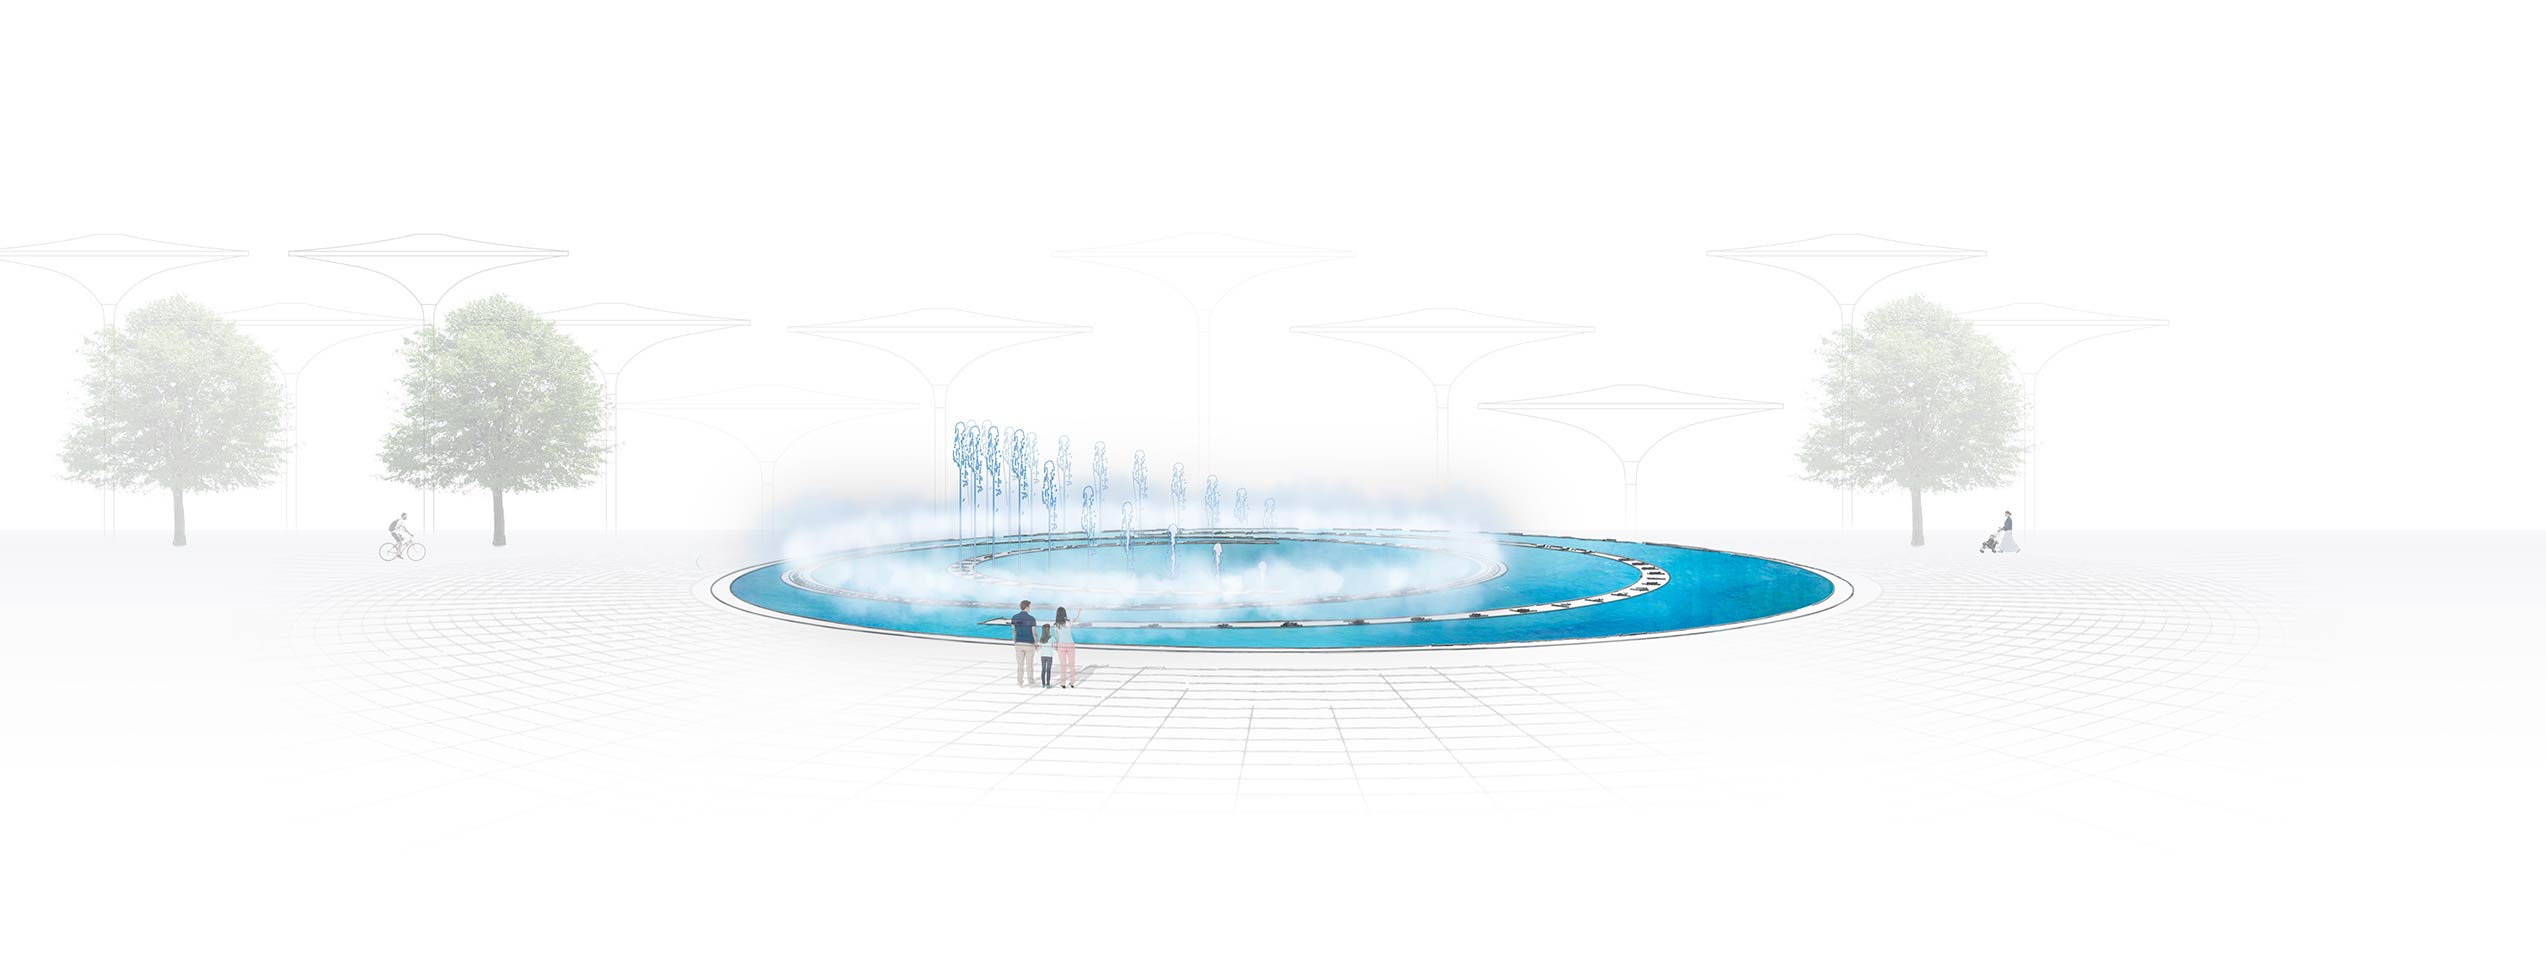 Fontana graphical representation of a concept design of a water feature.